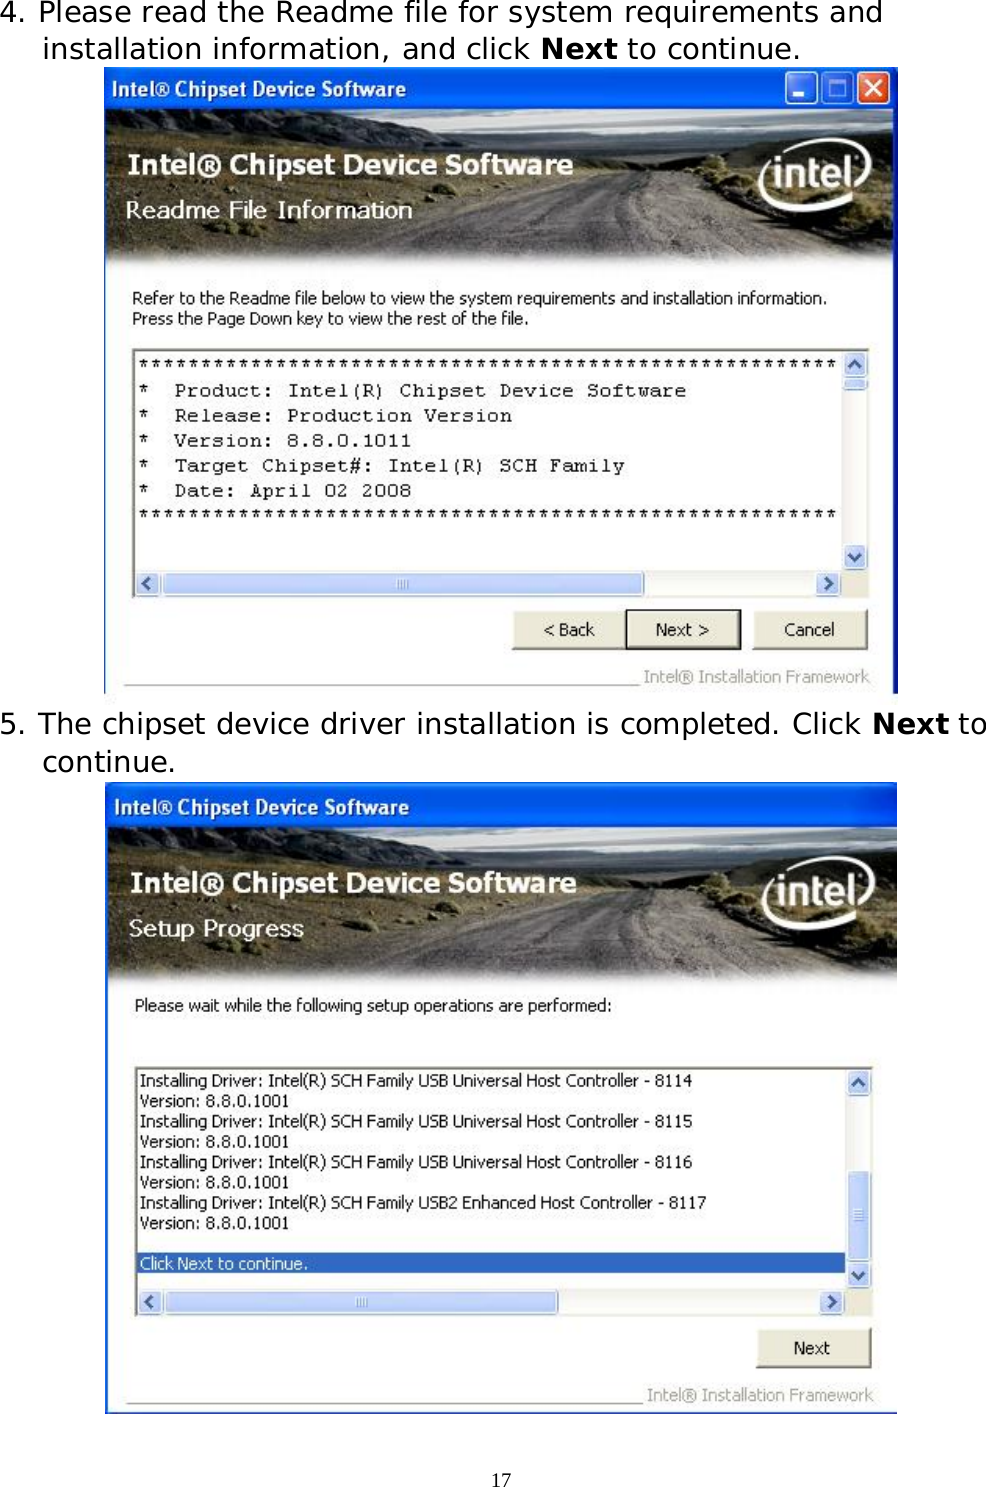  17 4. Please read the Readme file for system requirements and installation information, and click Next to continue.  5. The chipset device driver installation is completed. Click Next to continue.  